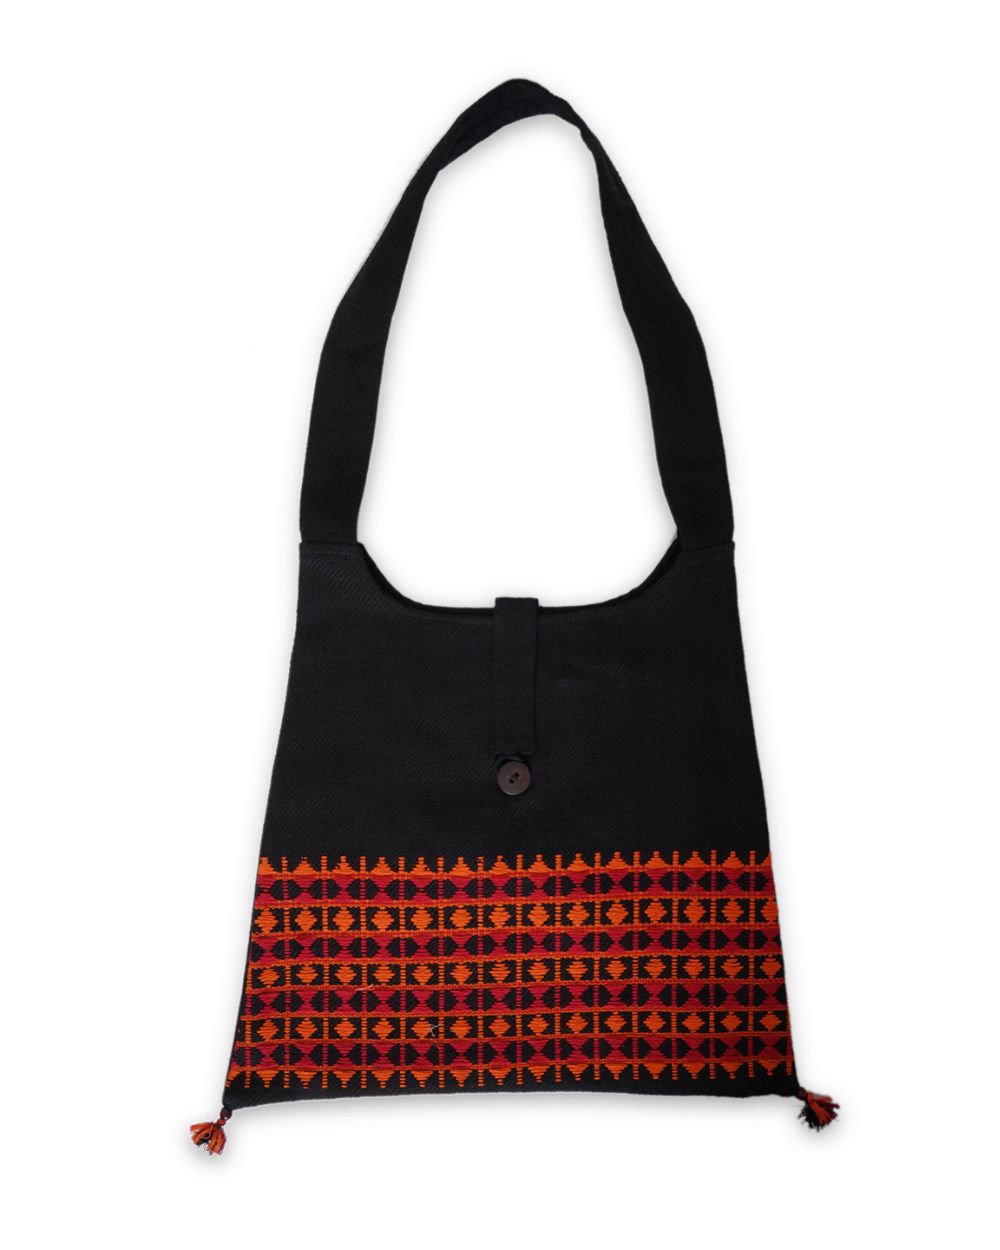 Tote Bag Handwoven, Red